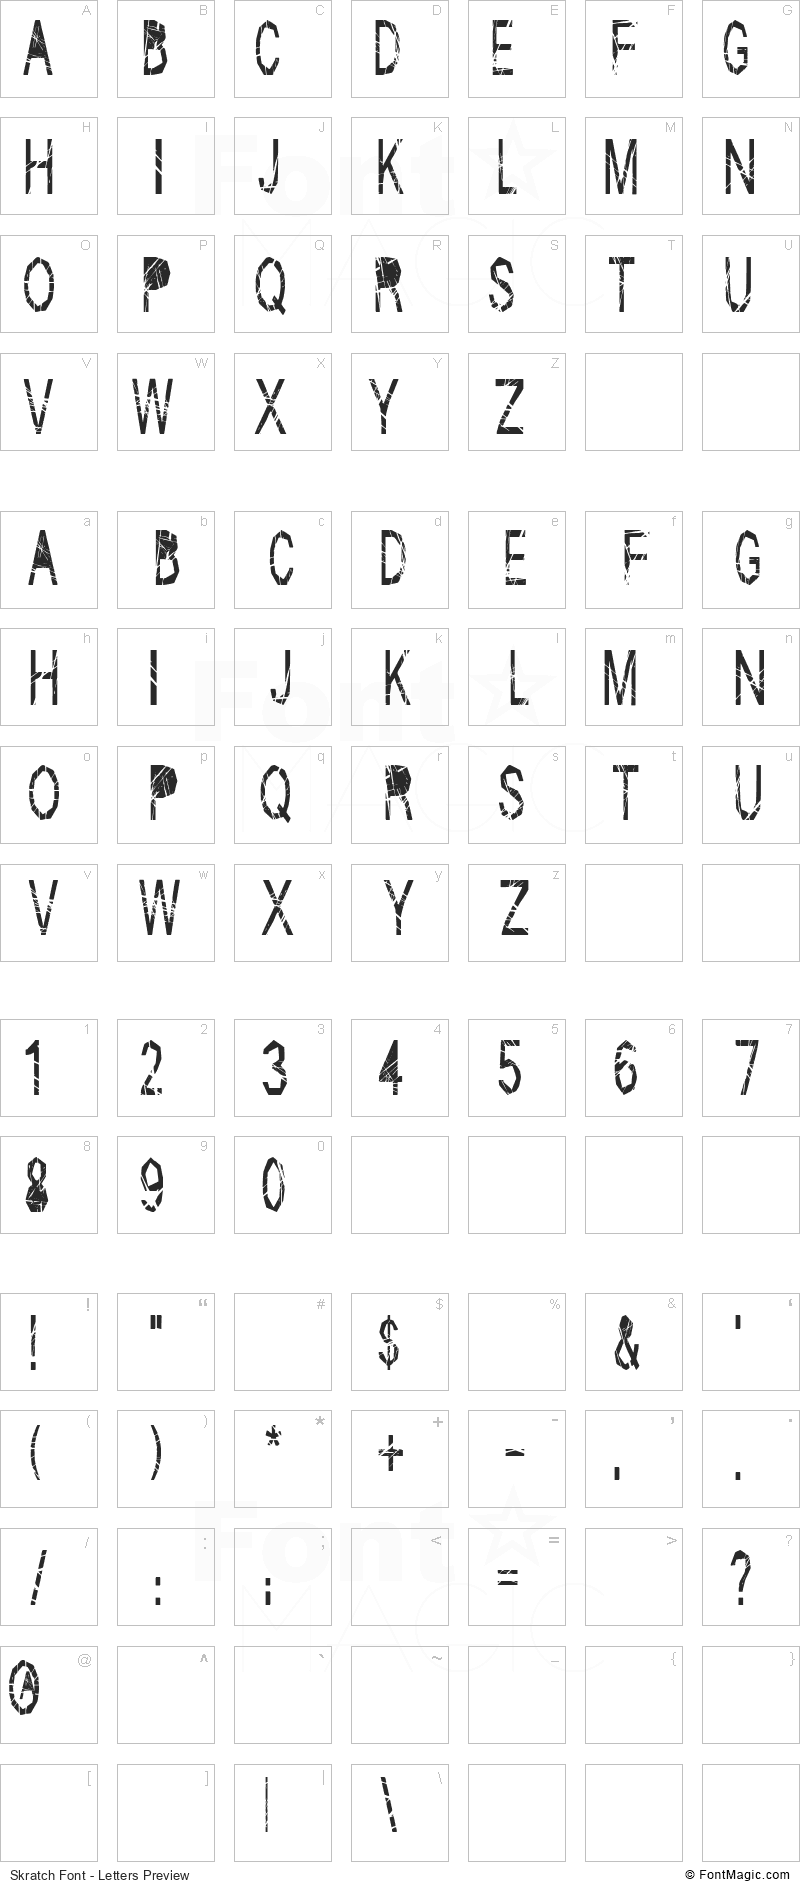 Skratch Font - All Latters Preview Chart